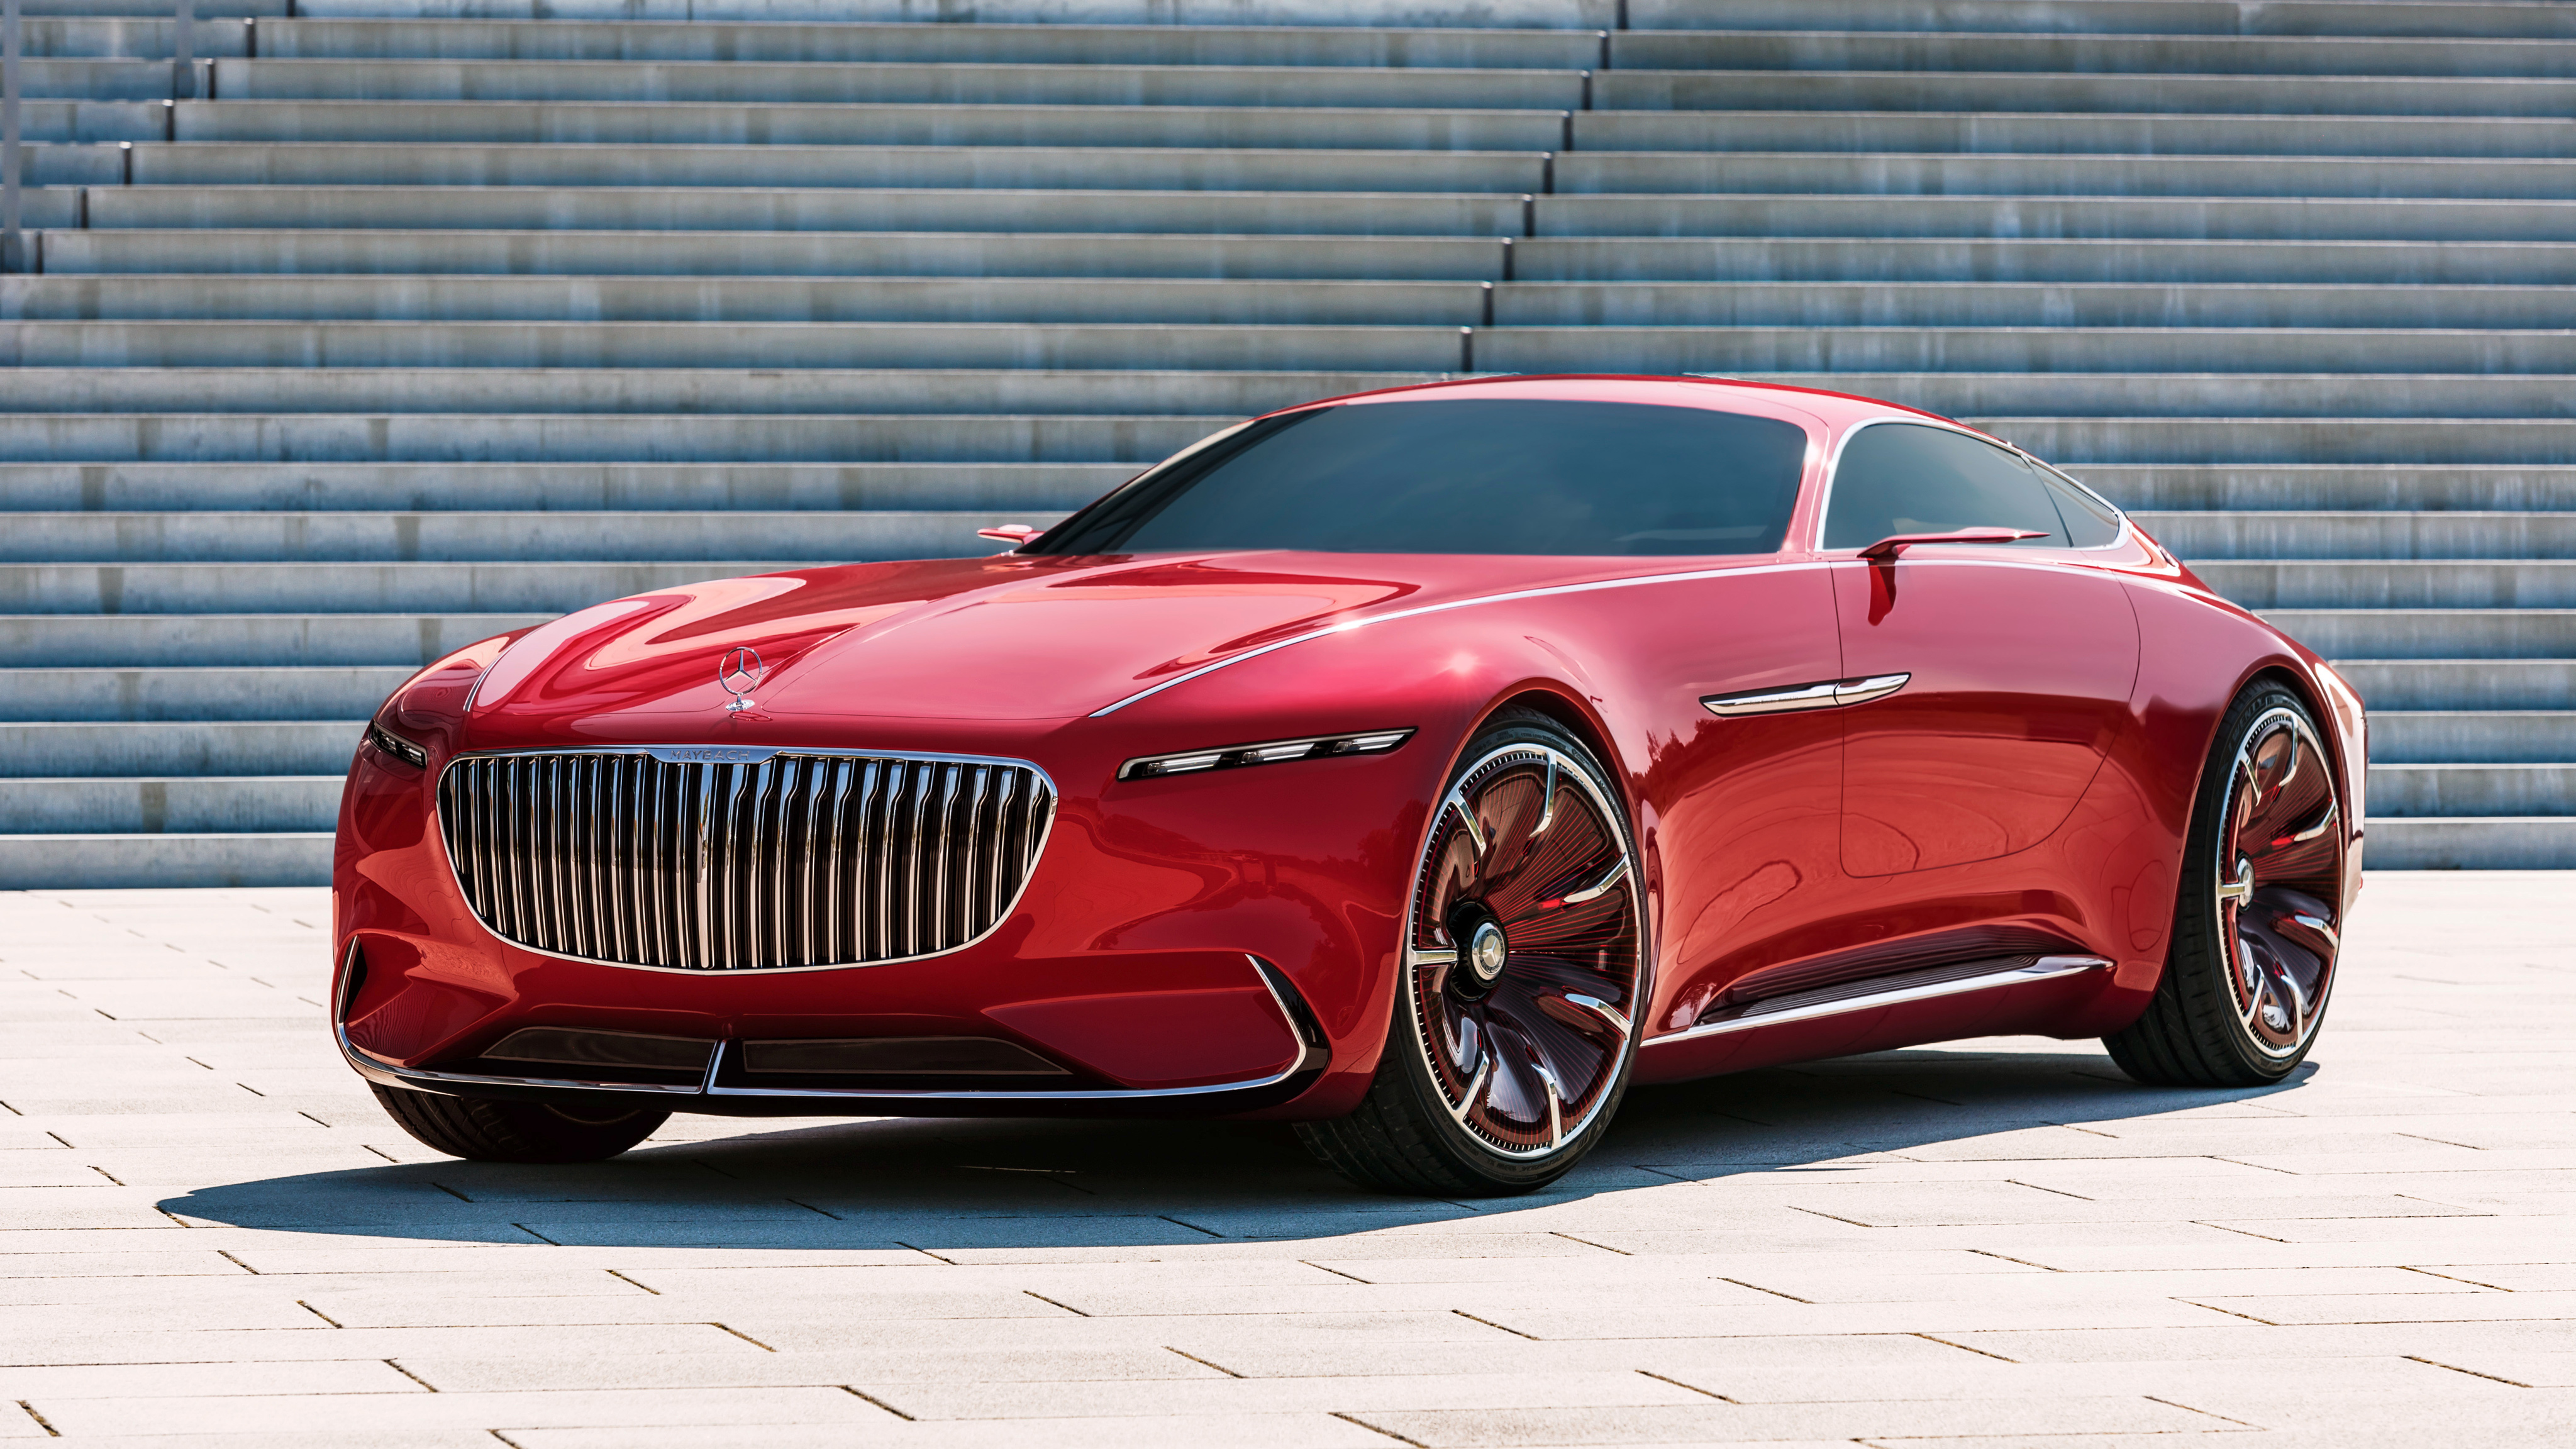 Ultimate luxury. Концепт Мерседес Майбах 6. Mercedes-Maybach Vision 6. Мерседес Майбах 6 Vision купе. Mercedes-Maybach 6 Vision Concept 2016.